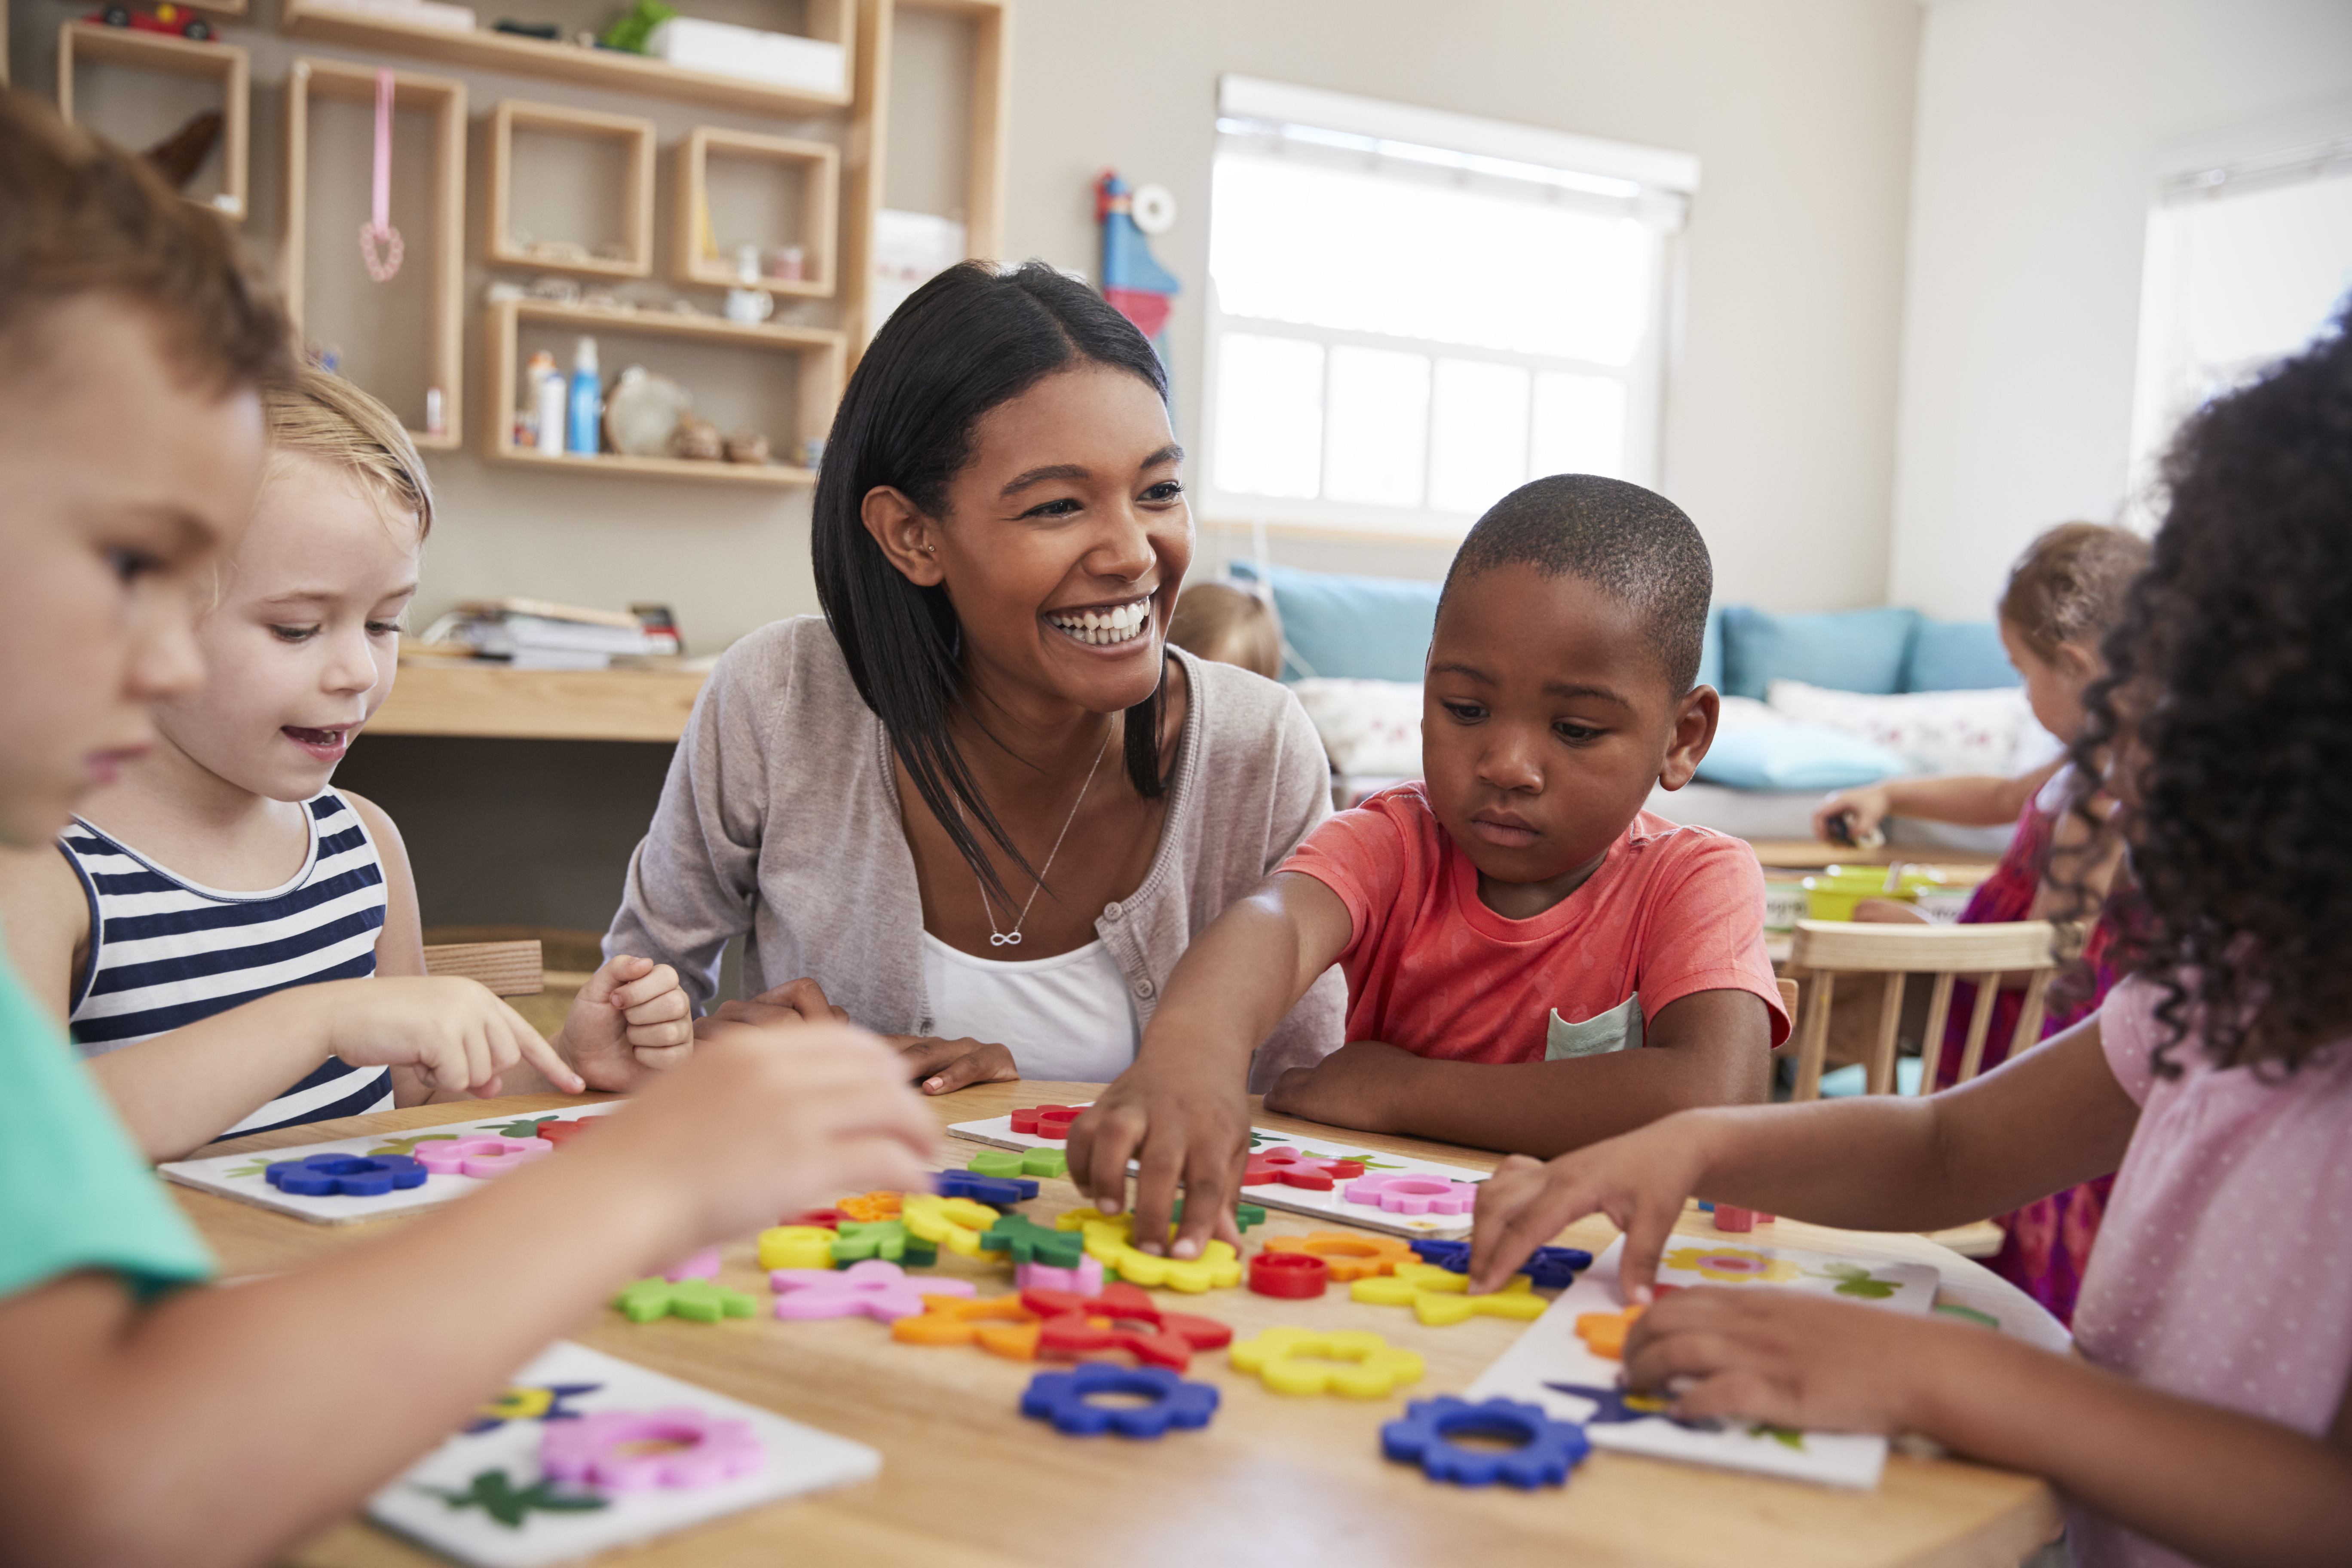 Smiling woman helping young children with an activity